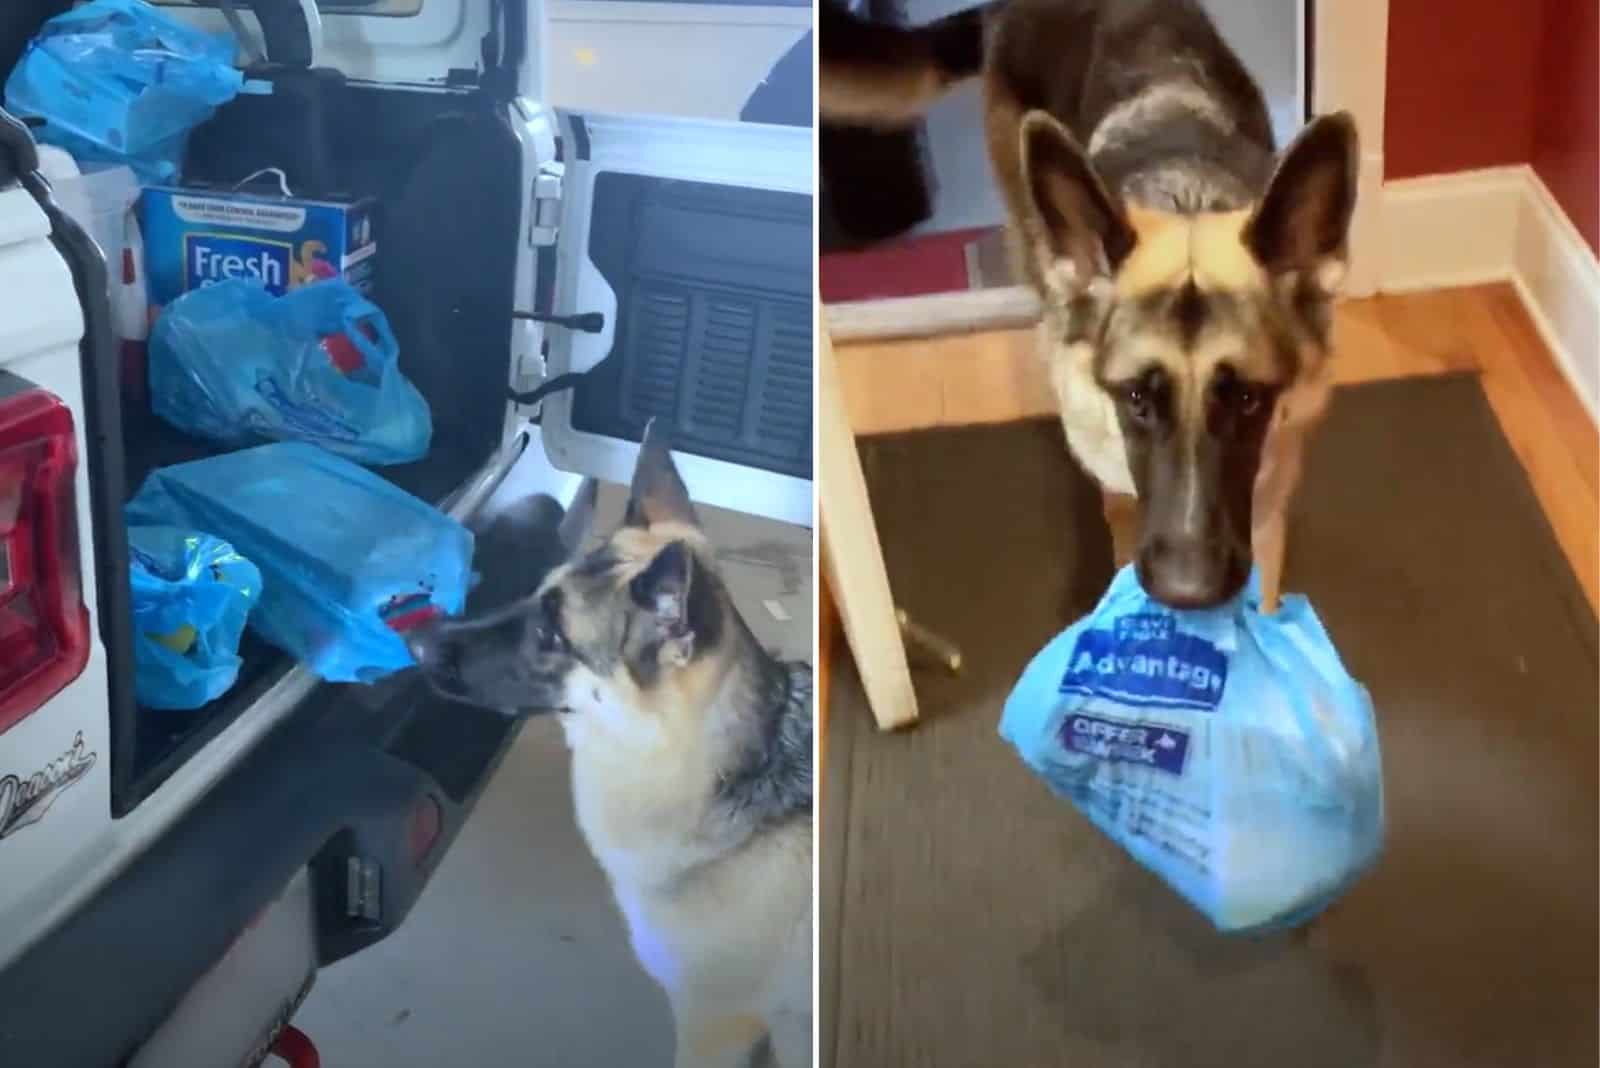 german shepherd dog carrying grocery bag in his mouth